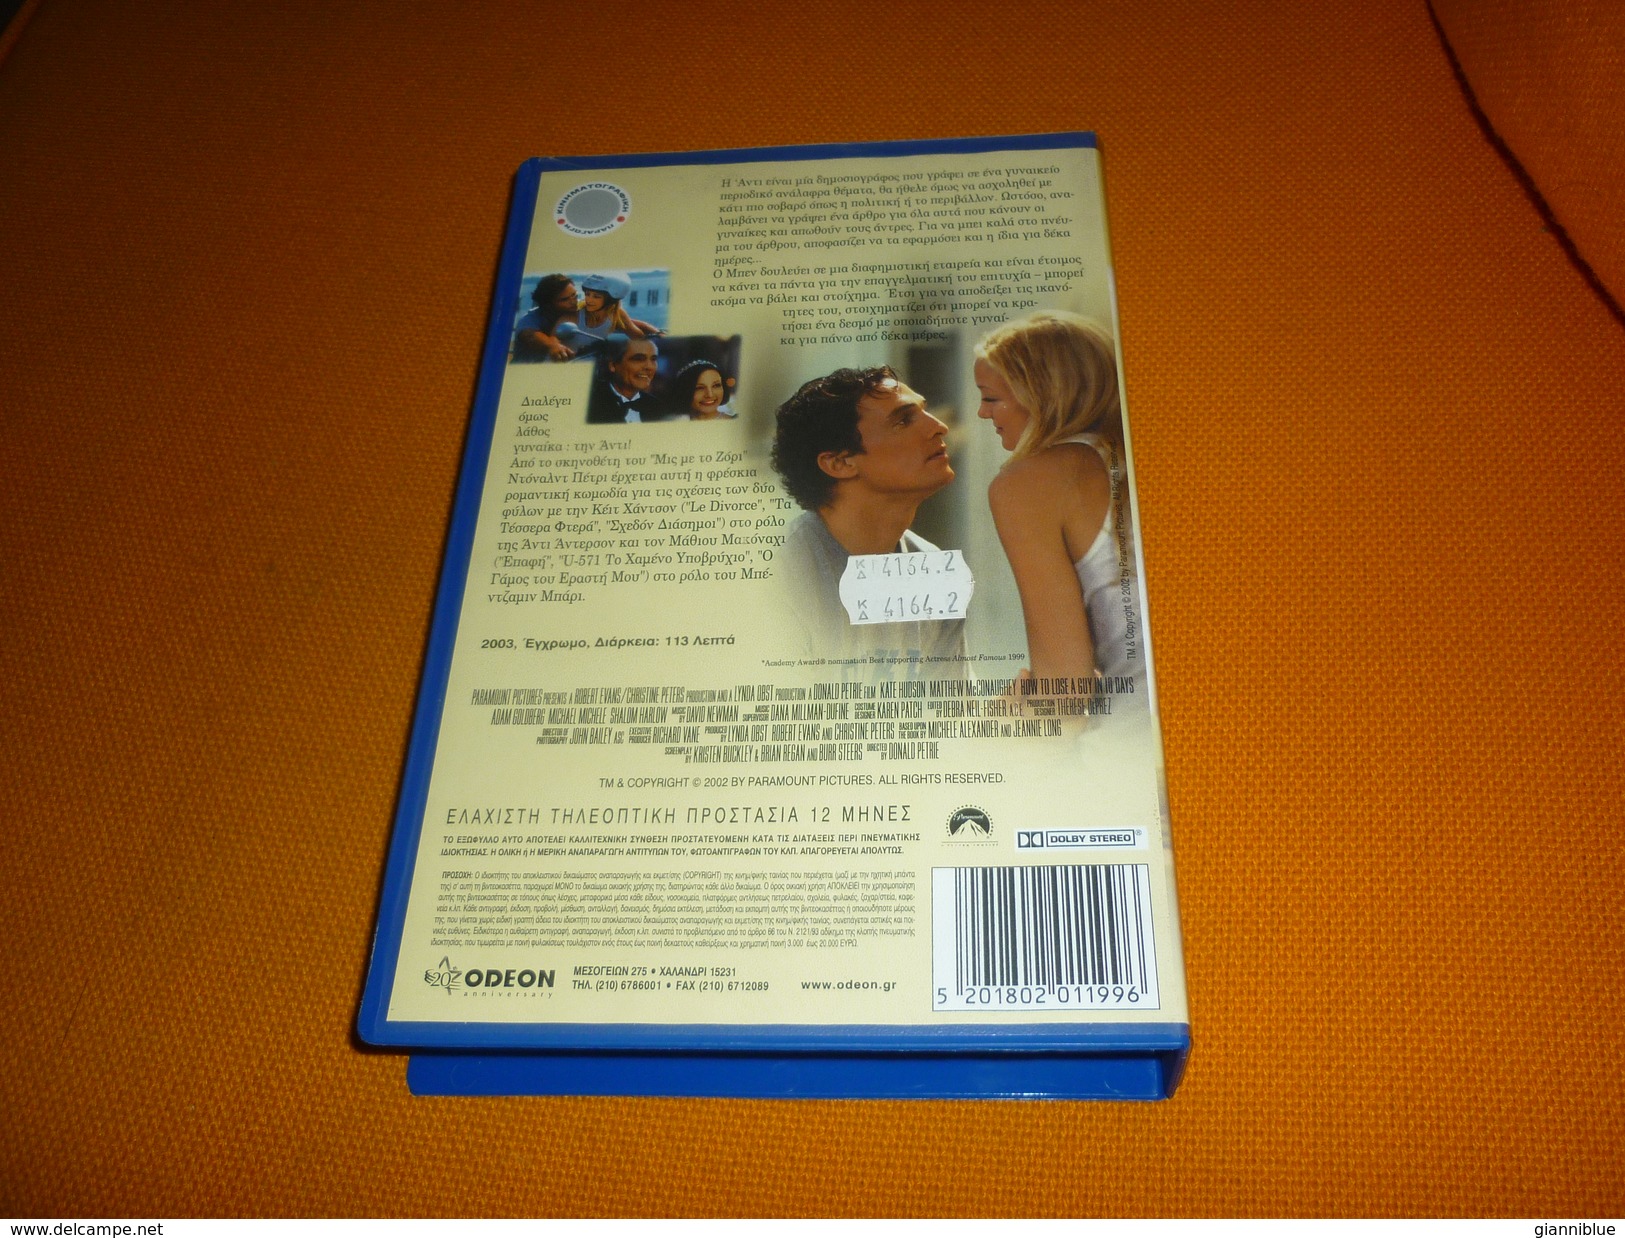 How To Lose A Guy In 10 Days Old Greek Vhs Cassette Tape From Greece - Romantic